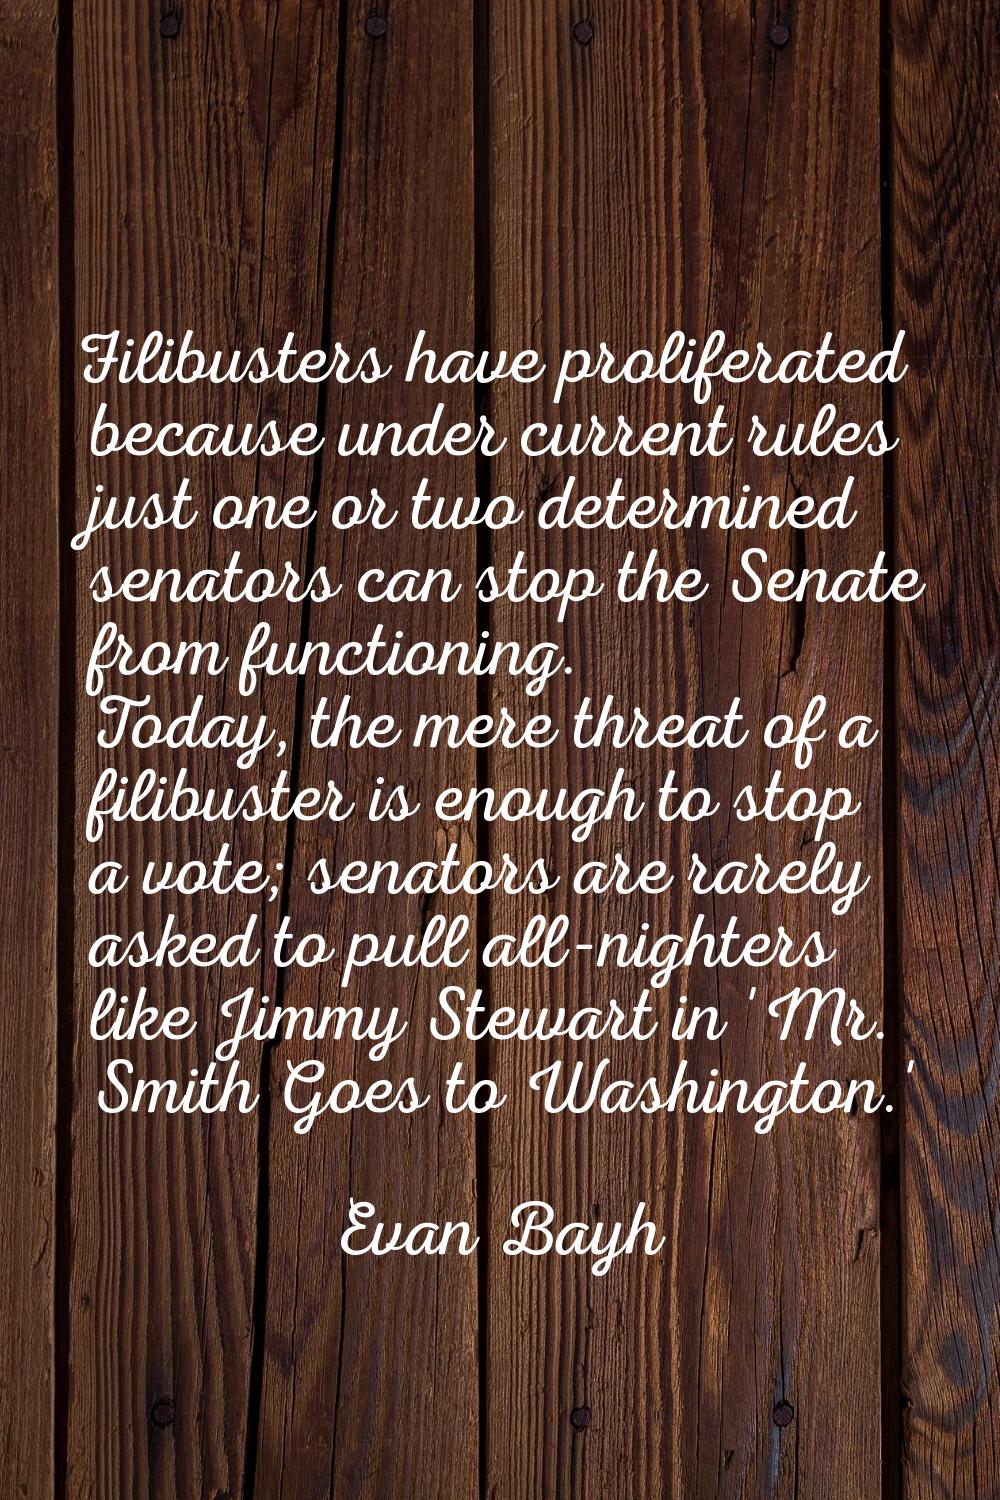 Filibusters have proliferated because under current rules just one or two determined senators can s